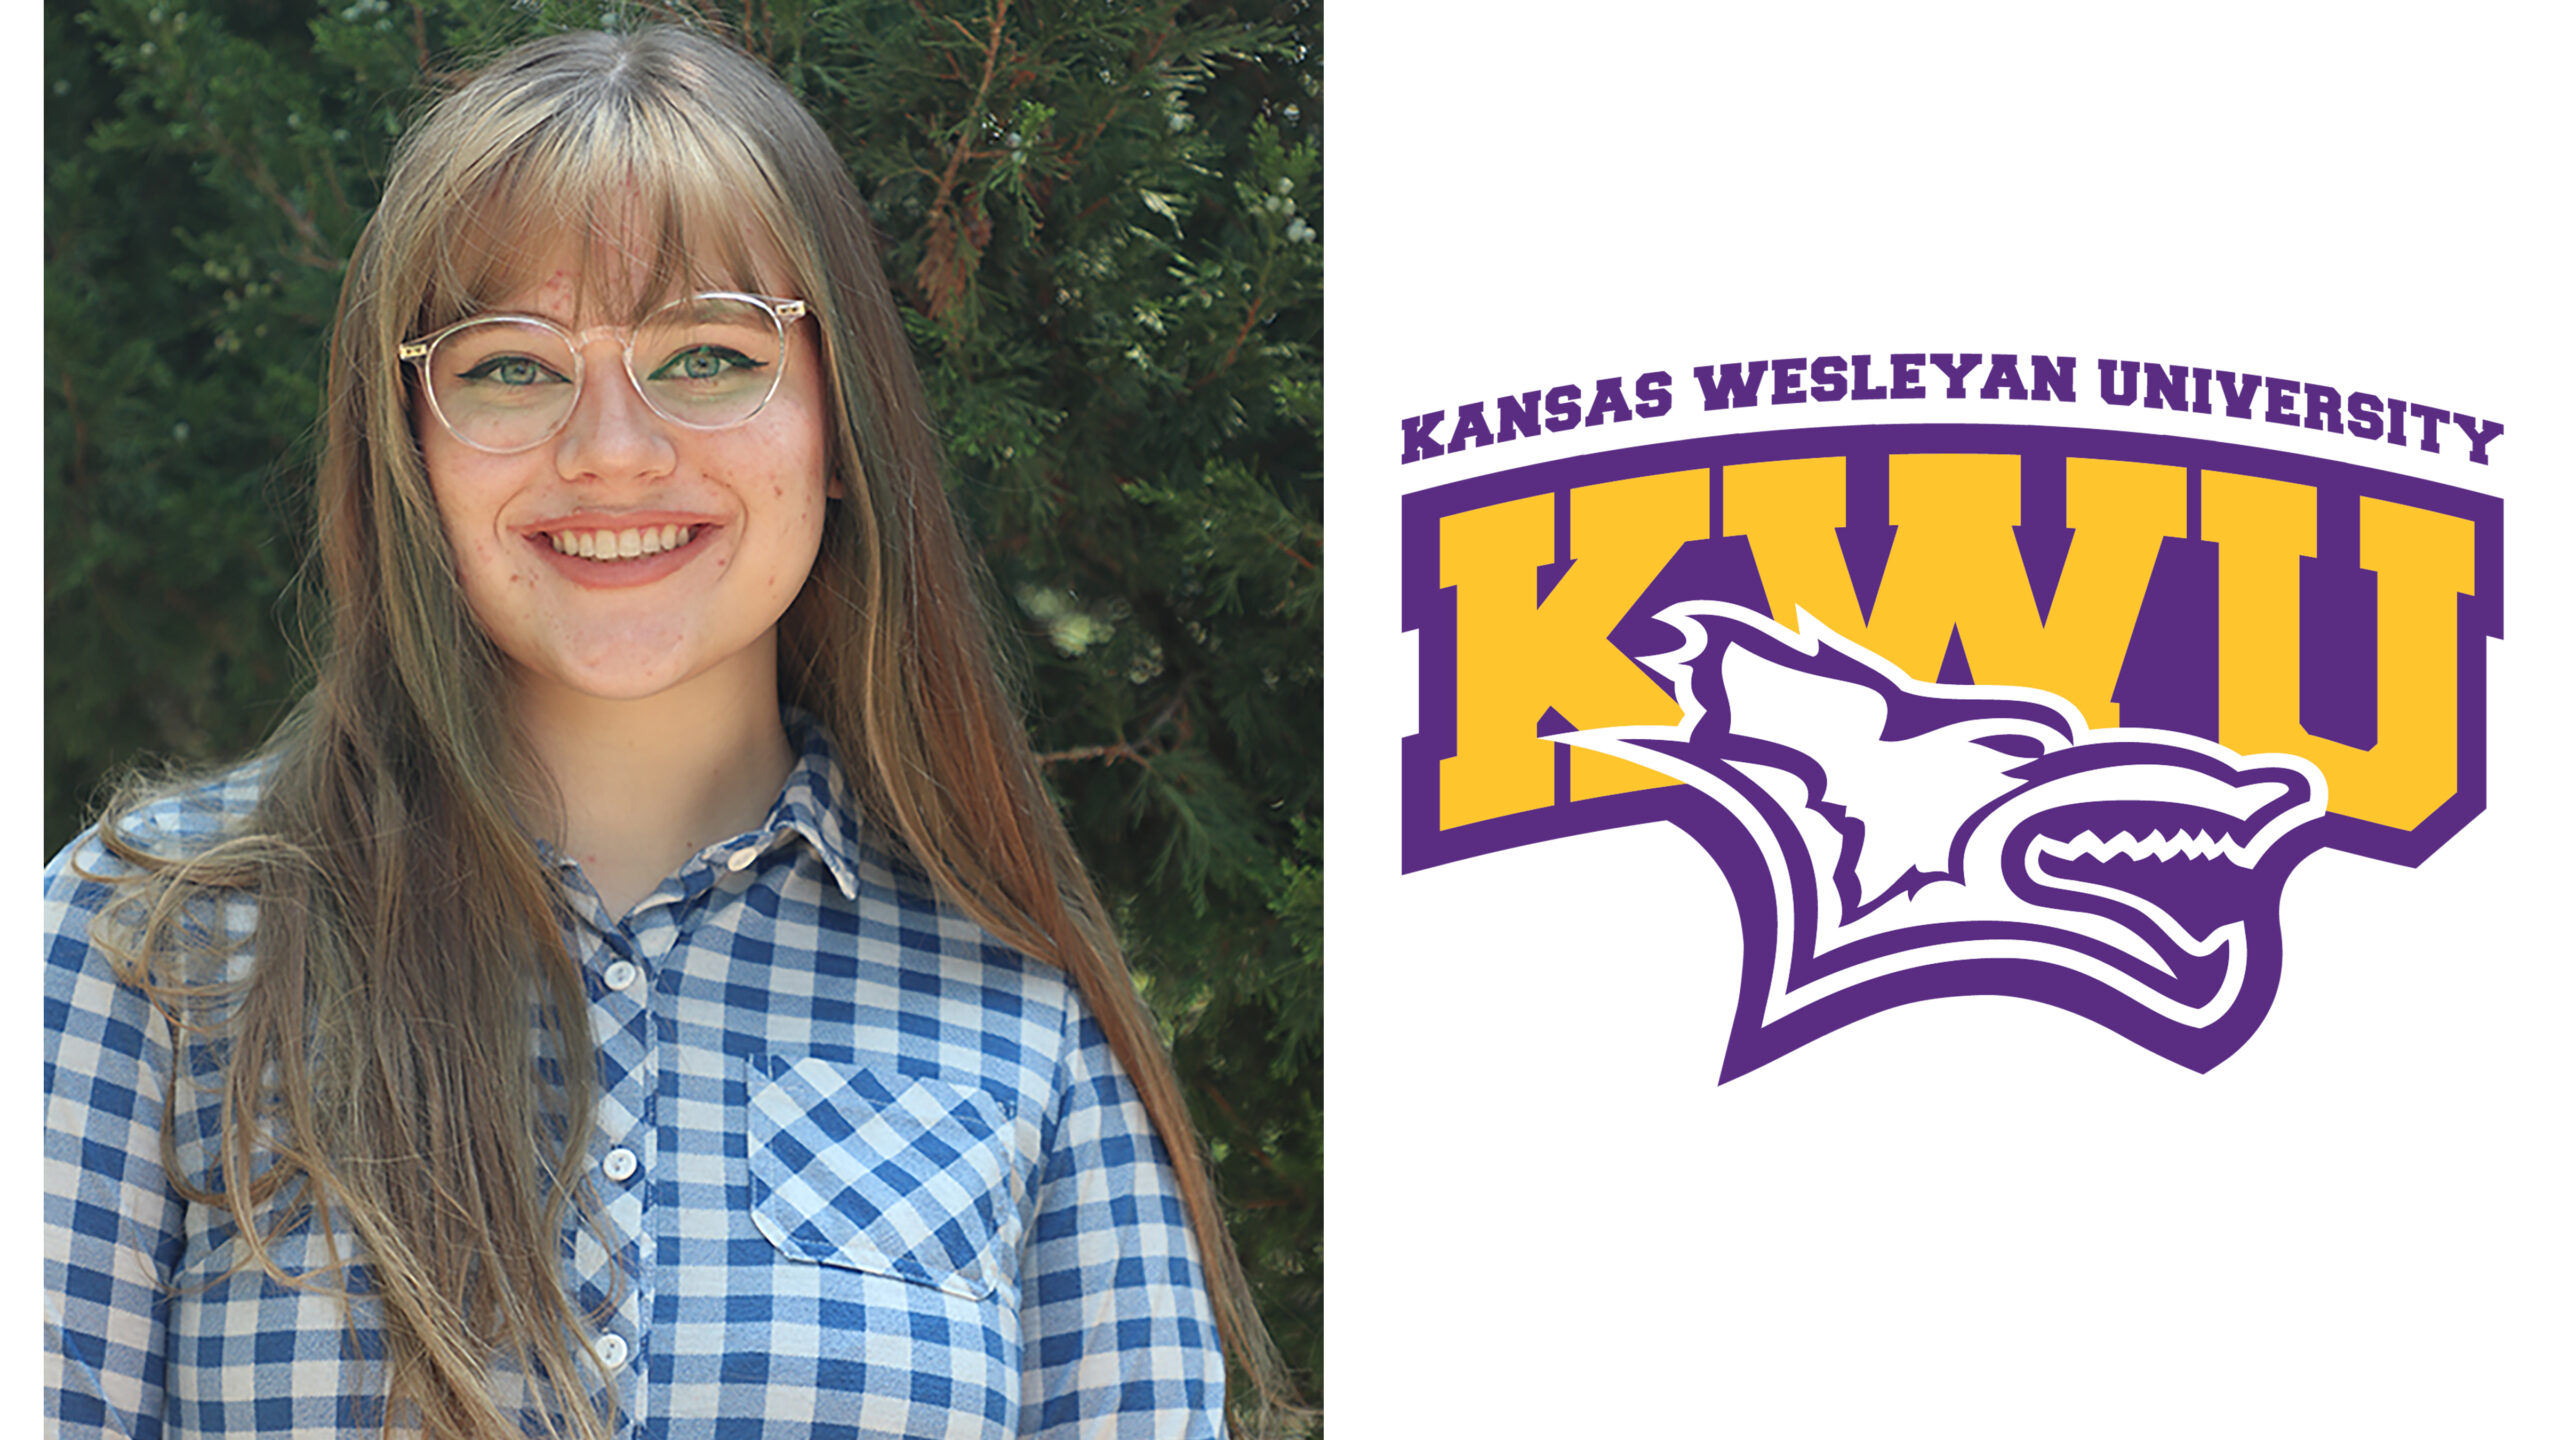 KWU Student Selected to Participate in Panel Discussion on High School Sports Coverage